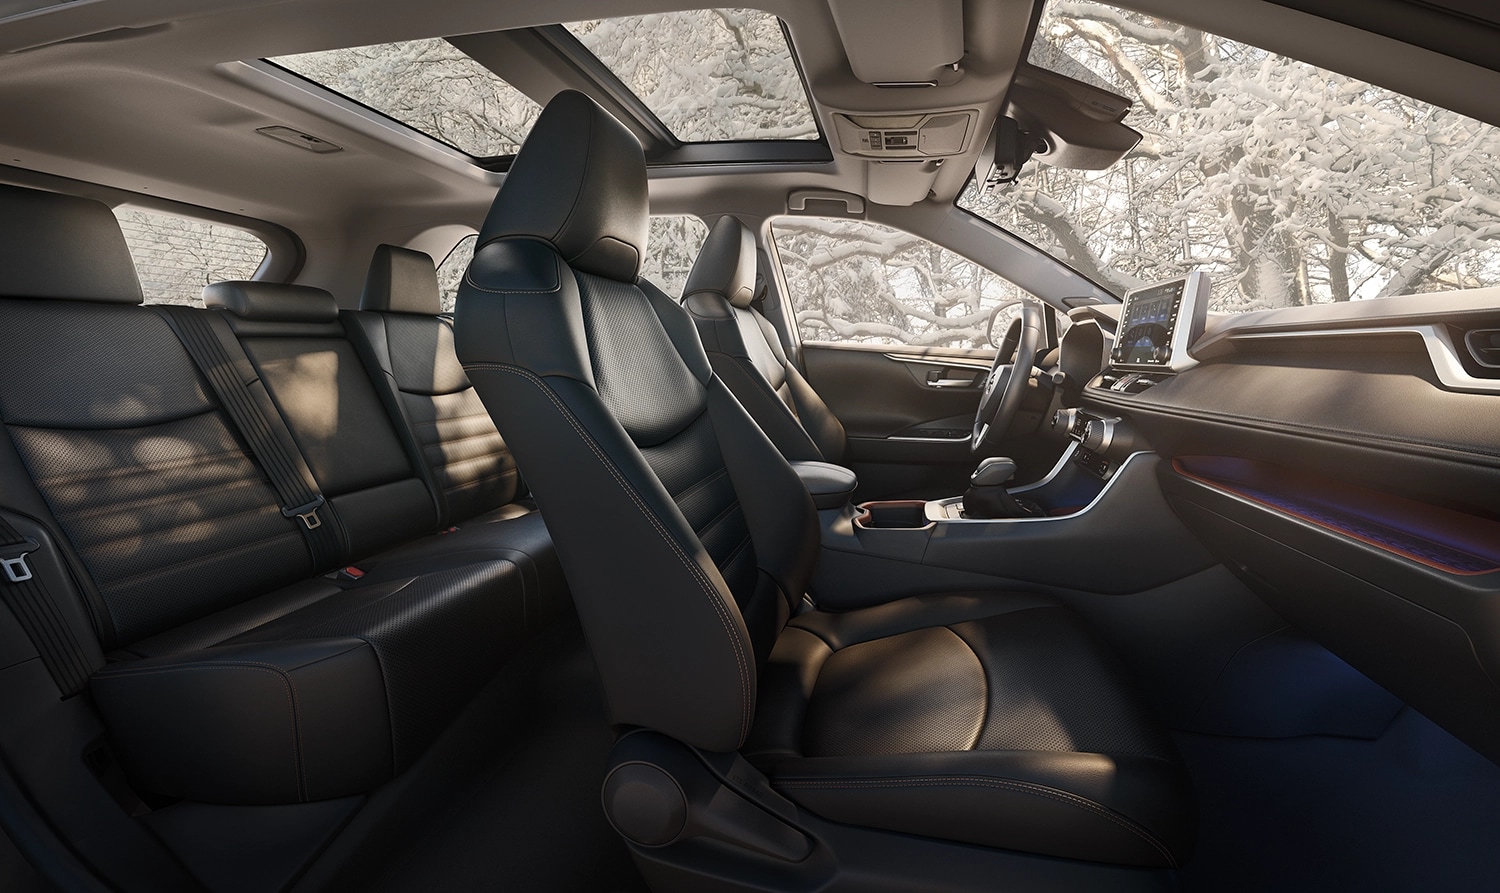 Interior space between the two rows of a 2023 Toyota Rav4 Midsize SUV.